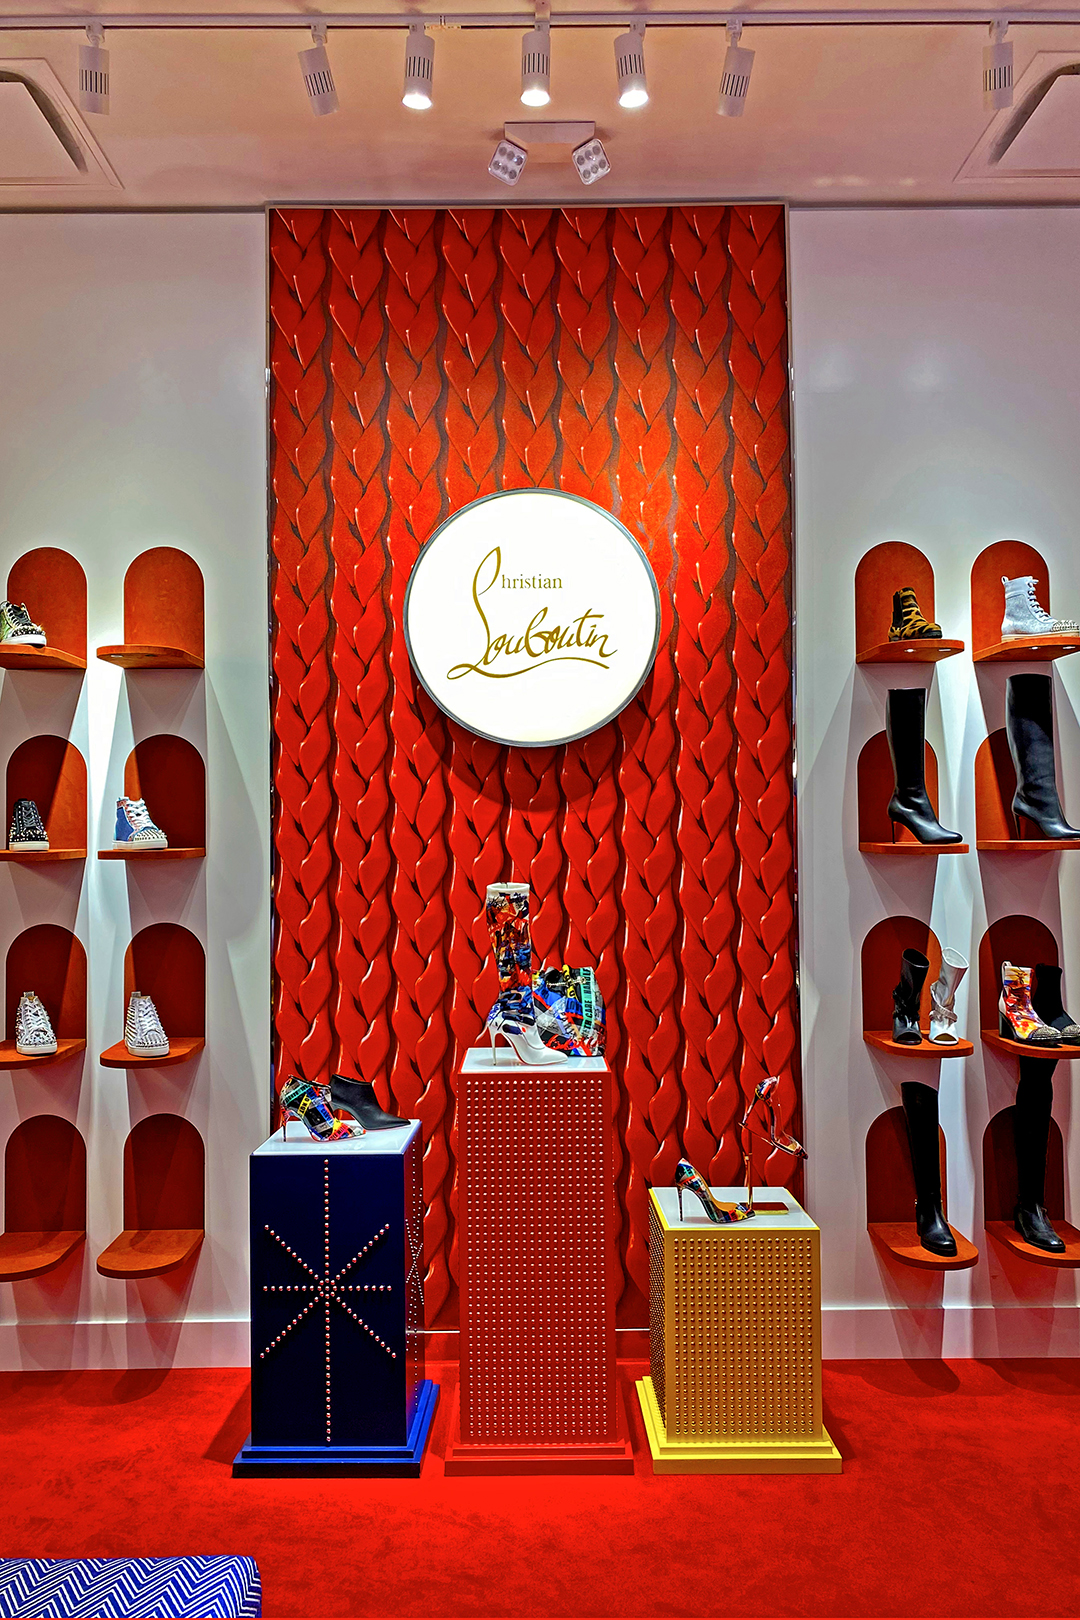 Er deprimeret Ærlighed Amorous The Ultimate Christian Louboutin Outlet Shopping Guide - The Luxury Lowdown